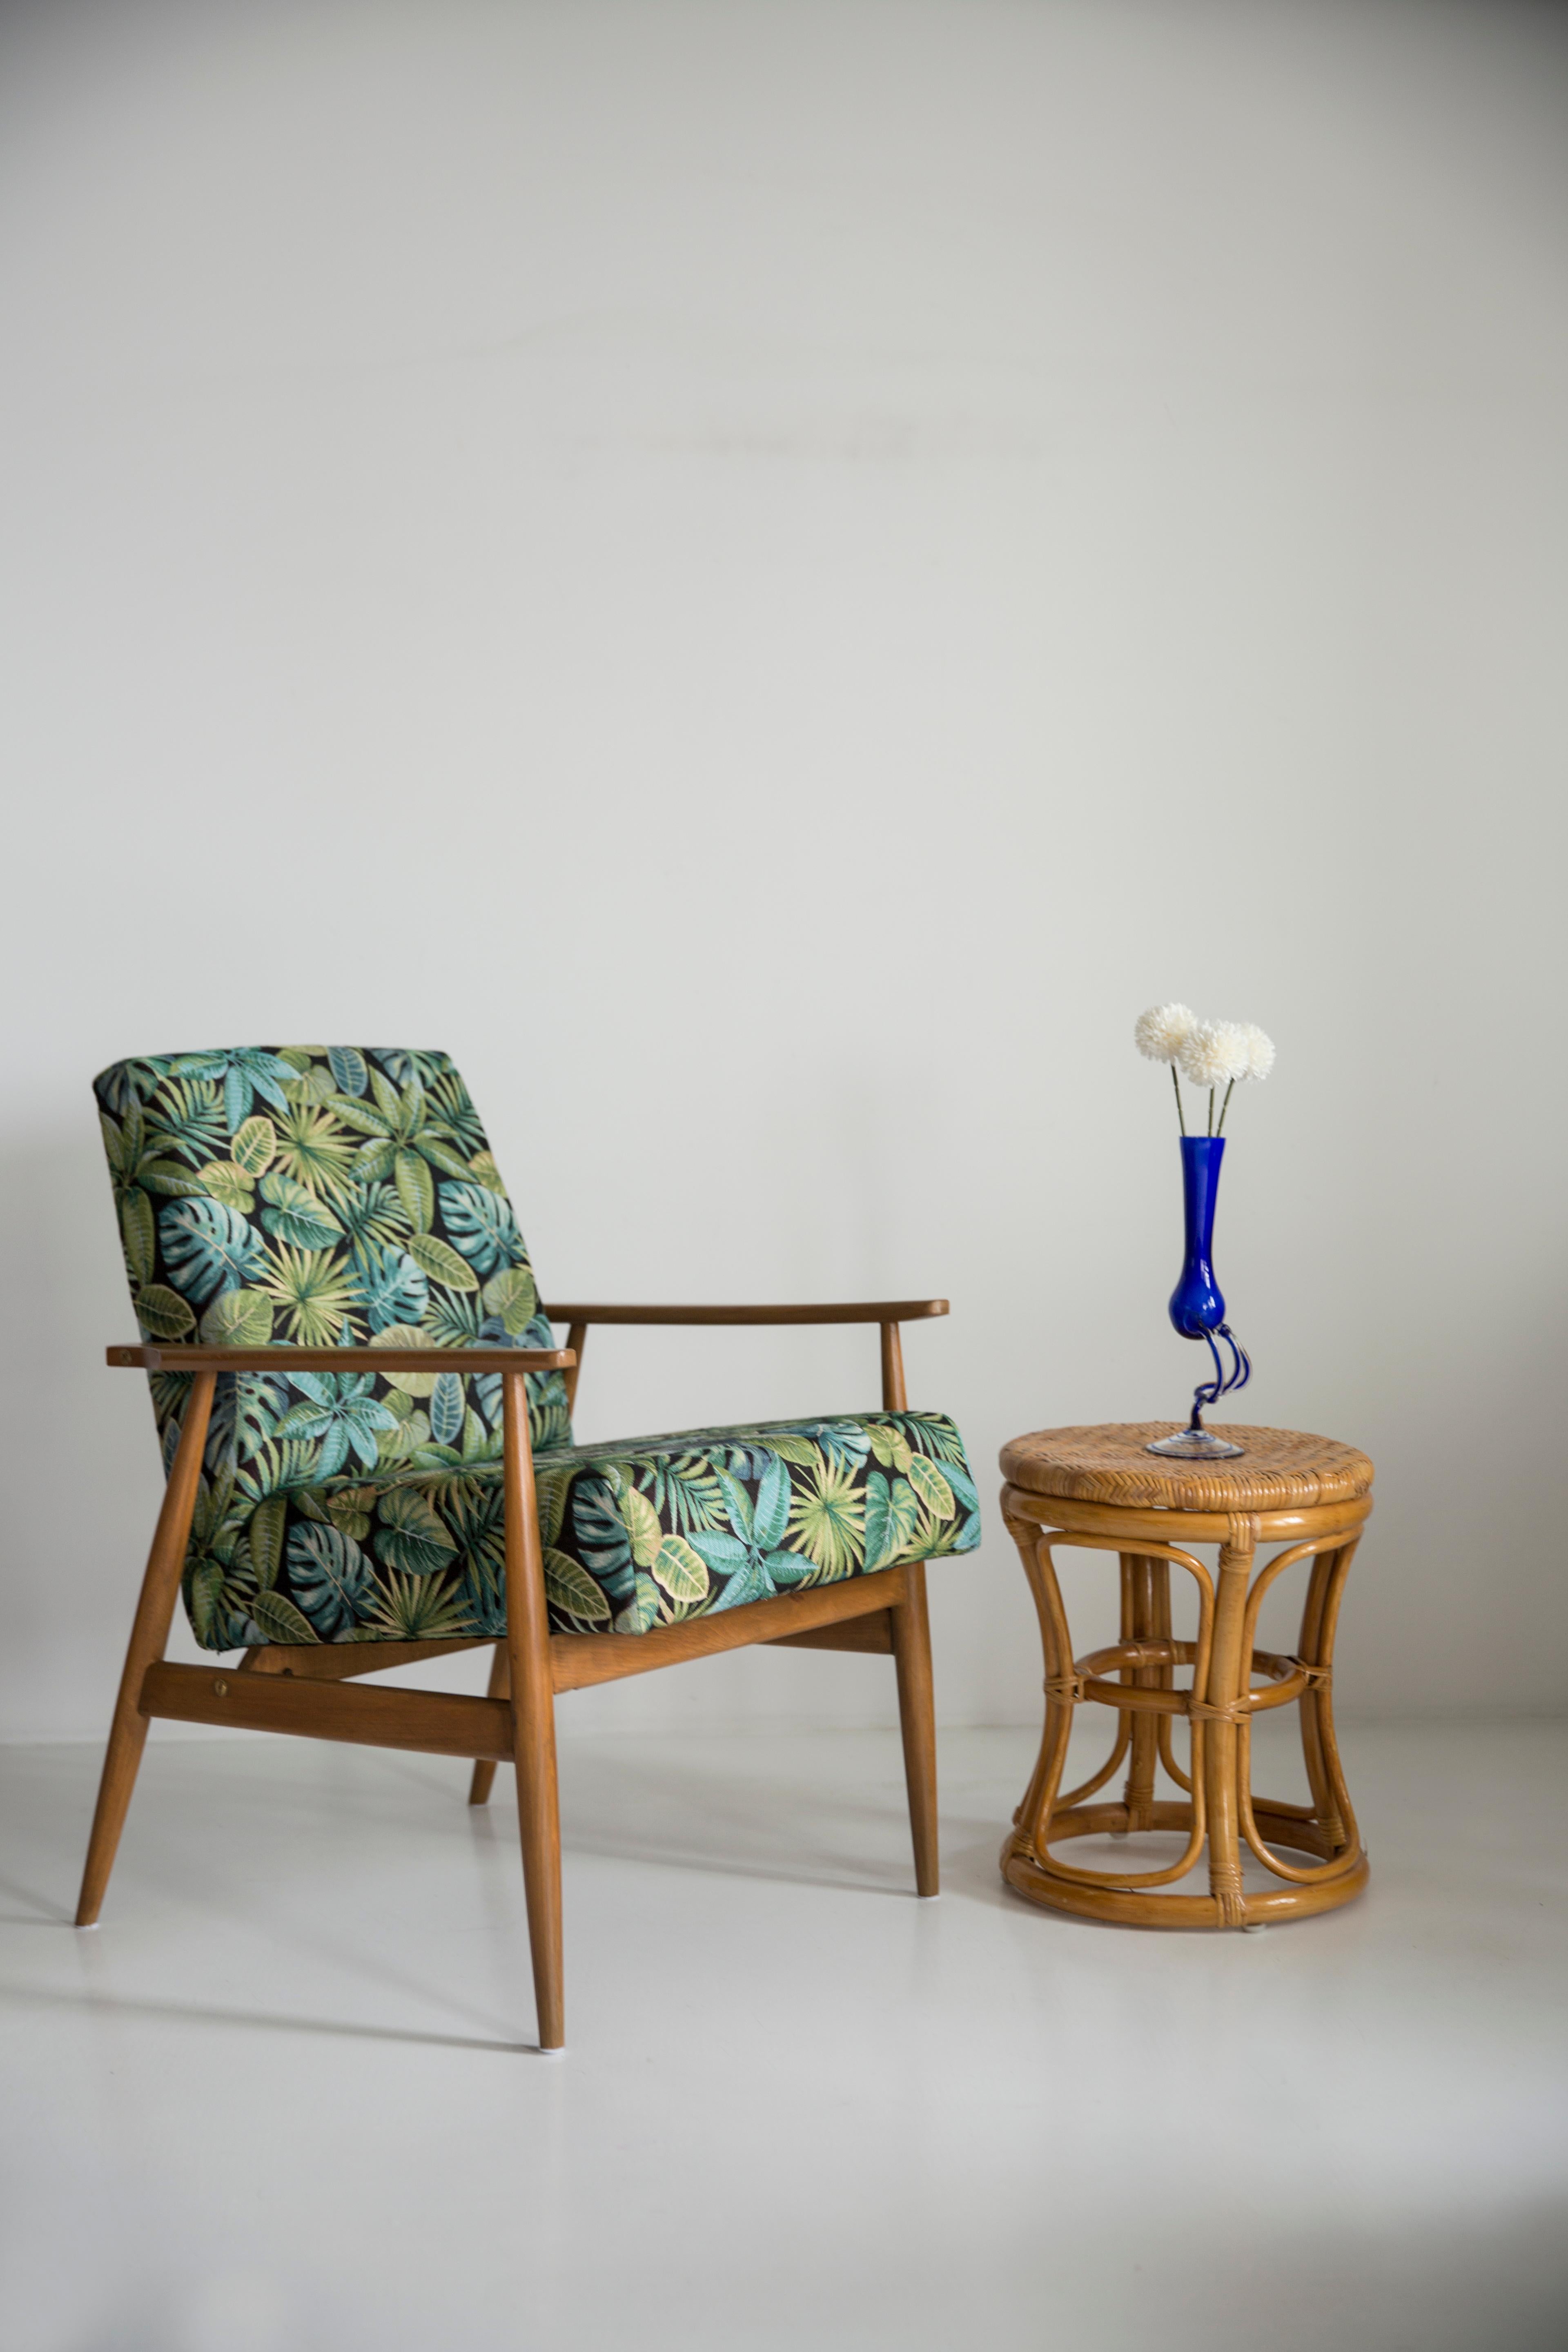 A beautiful, restored armchair designed by Henryk Lis. Furniture after full carpentry and upholstery renovation. The fabric, which is covered with a backrest and a seat, is a high-quality Italian Green Leaves Jacquard. The armchair will be perfect